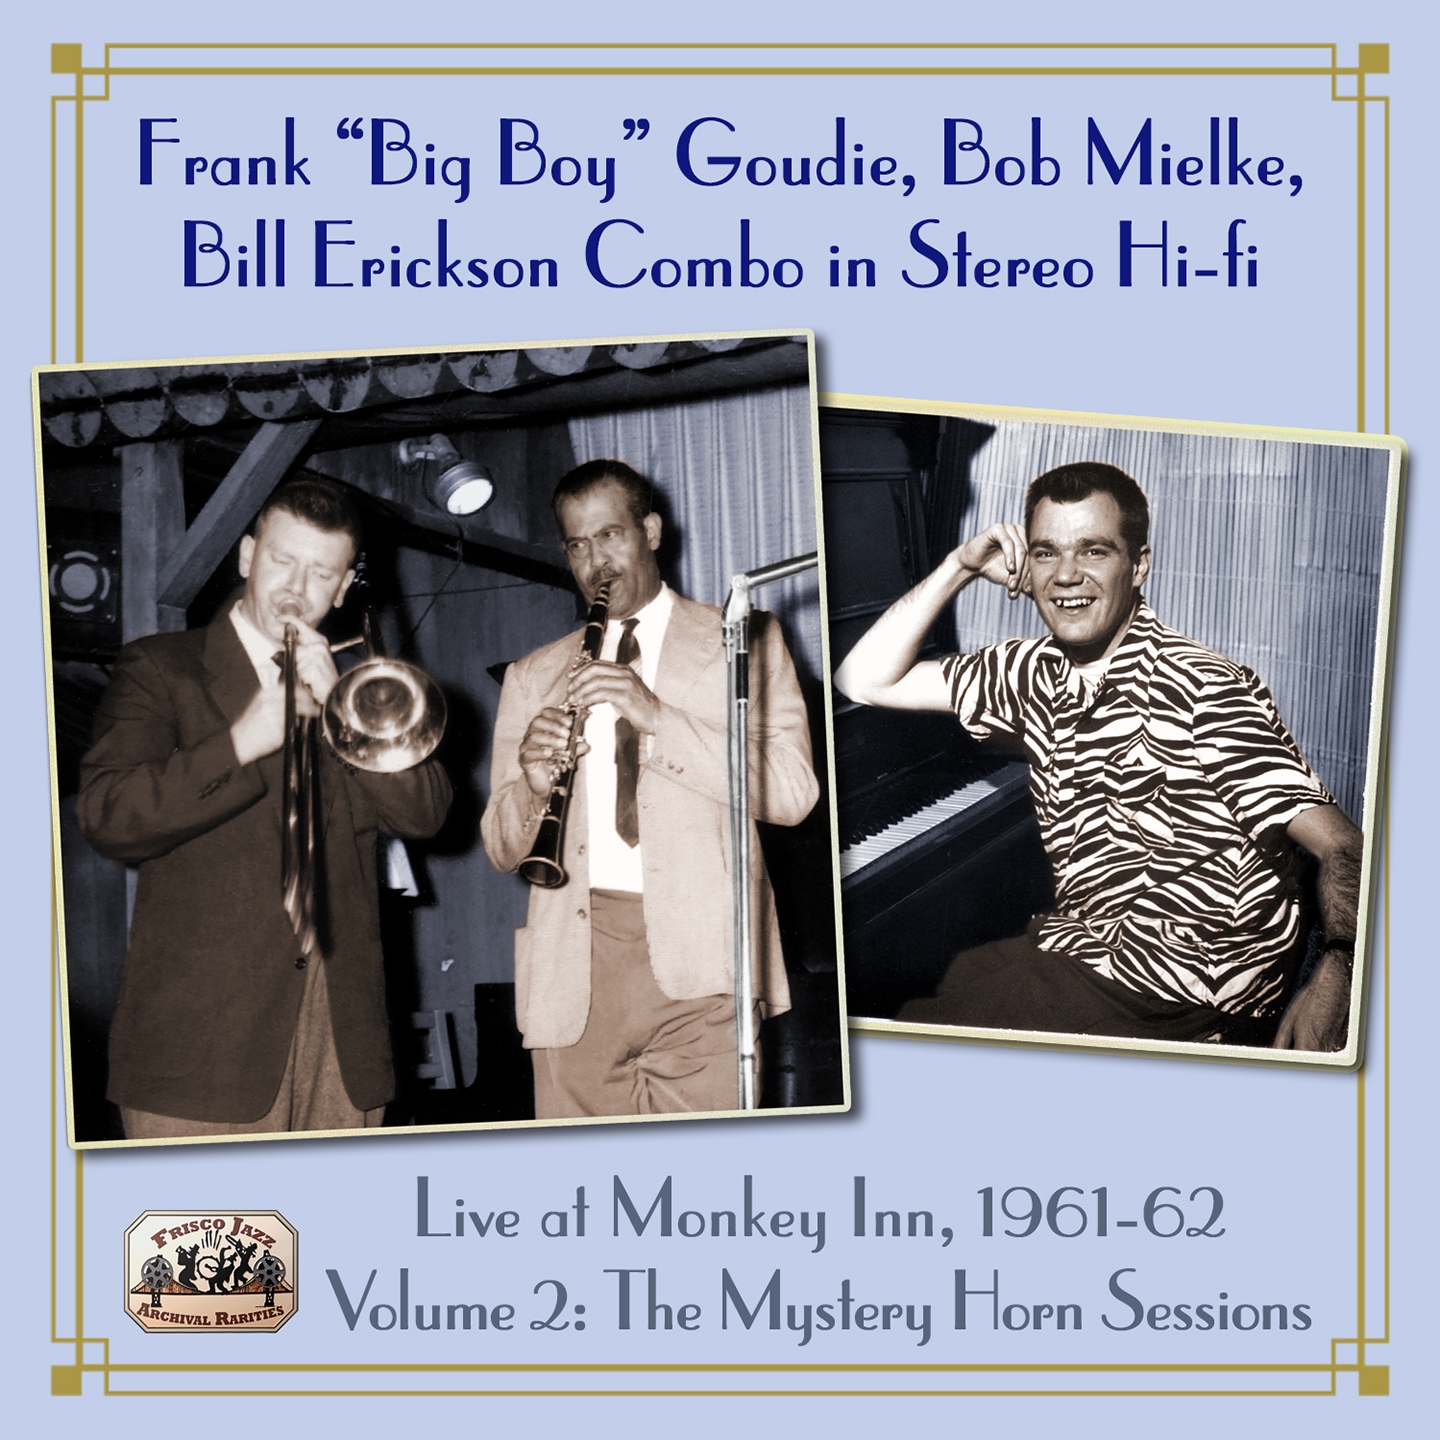 Live at Monkey Inn, 1961-62 Volume 2: The Mystery Horn Sessions